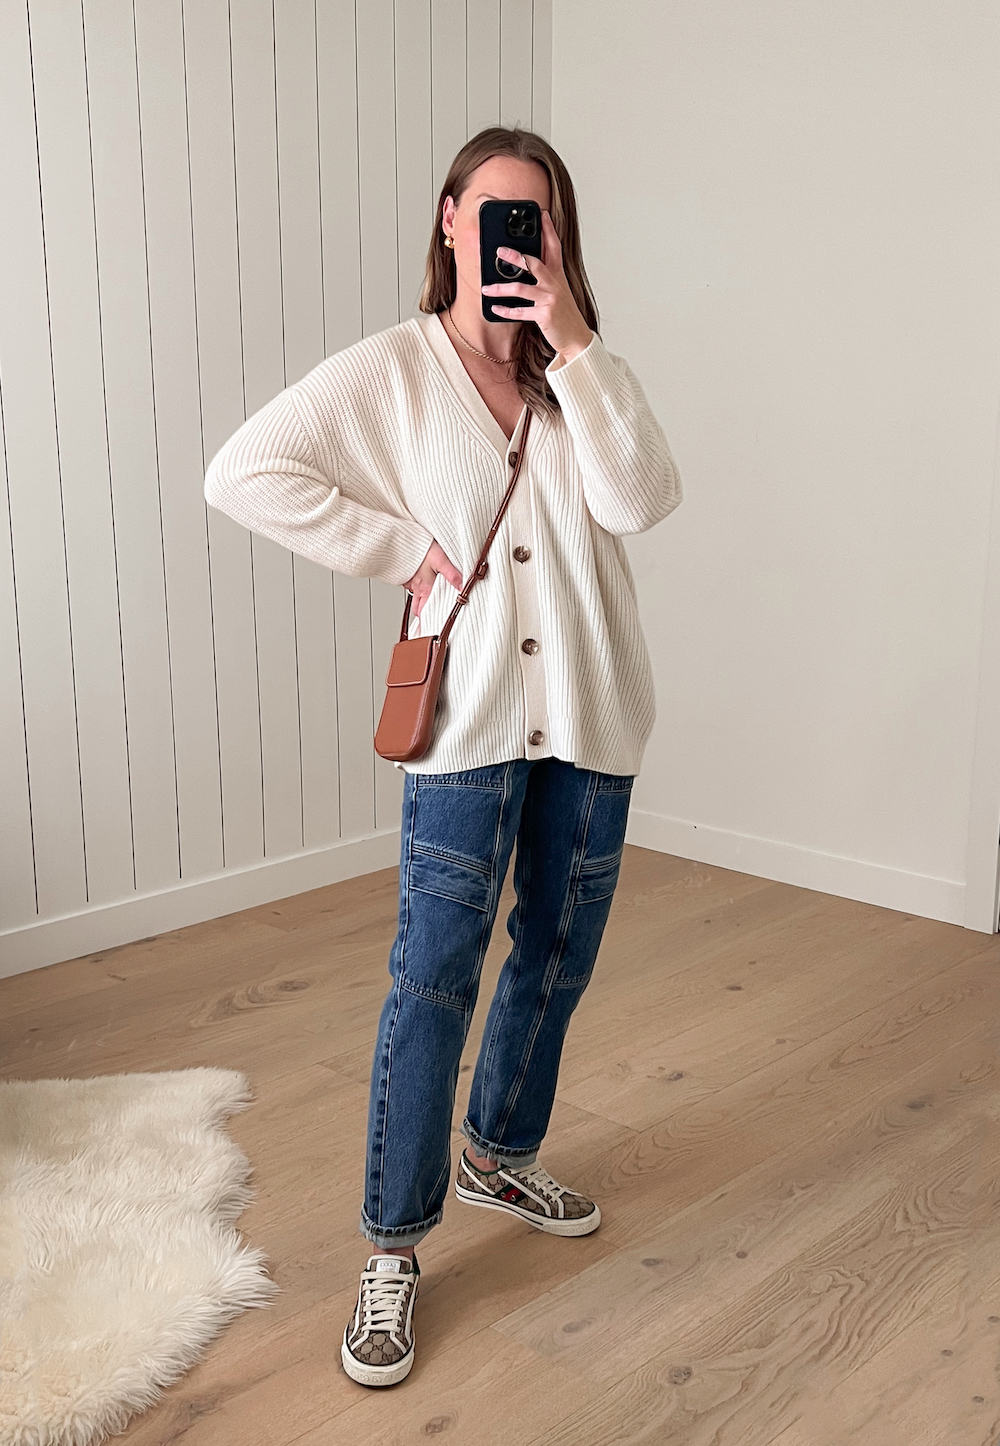 Christal wearing an ivory knit oversized cardigan from Quince (a brand like Everlane) with blue cargo jeans and tan canvas sneakers 